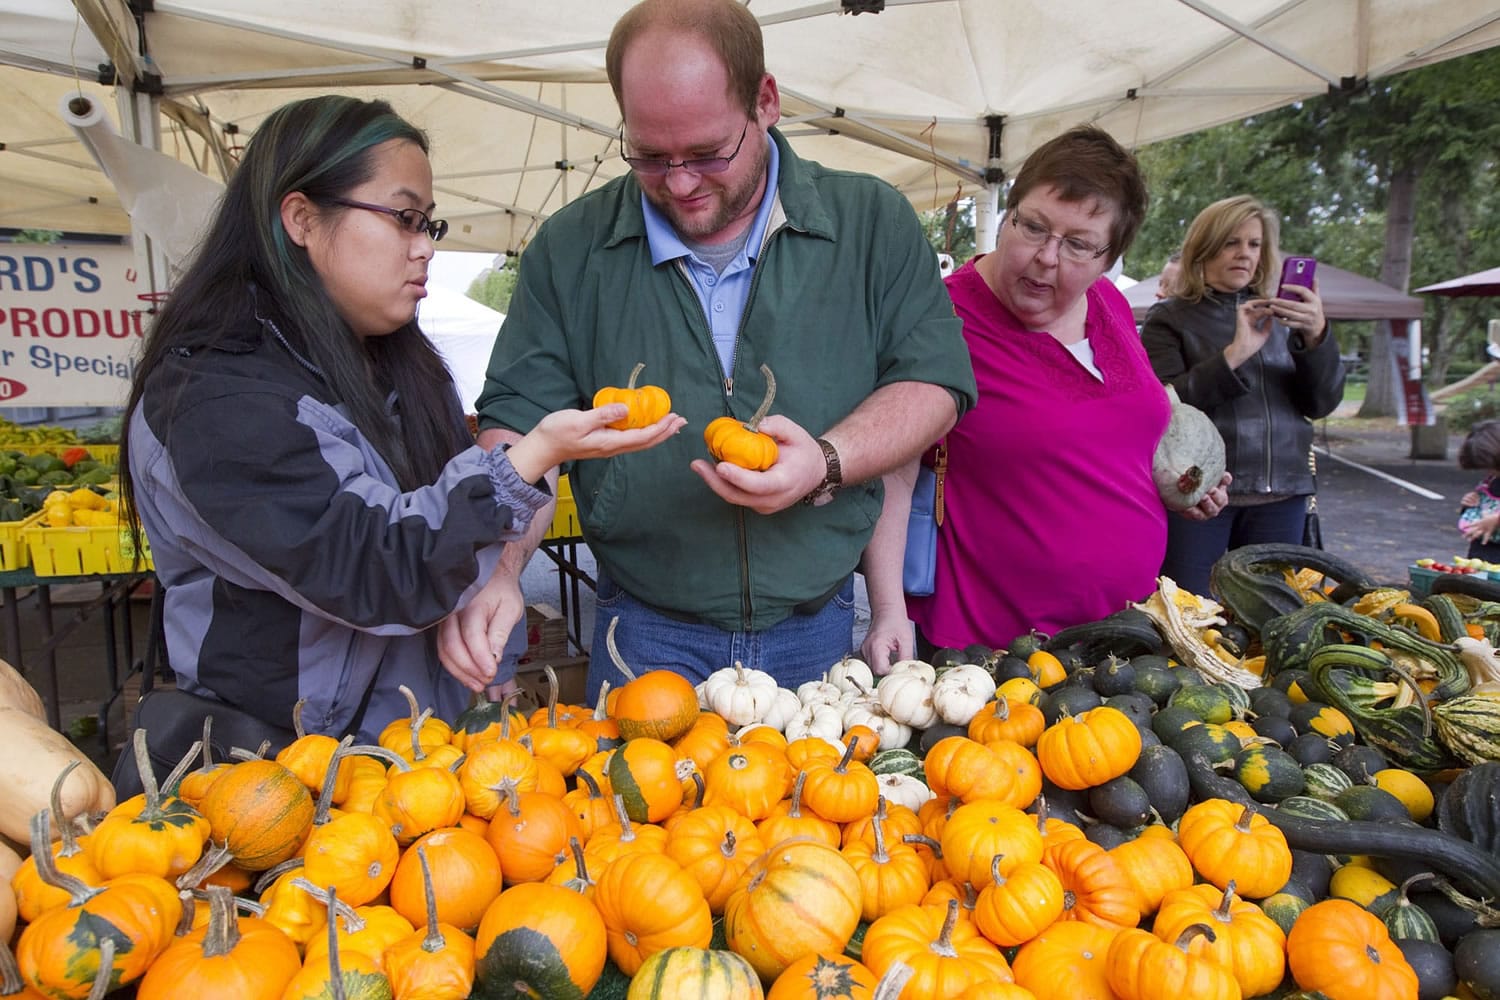 From left, Bonnie James, Matt James and Linda James select small pumpkins on sale Sunday, the last day of the Vancouver Farmers Market's 25th season.